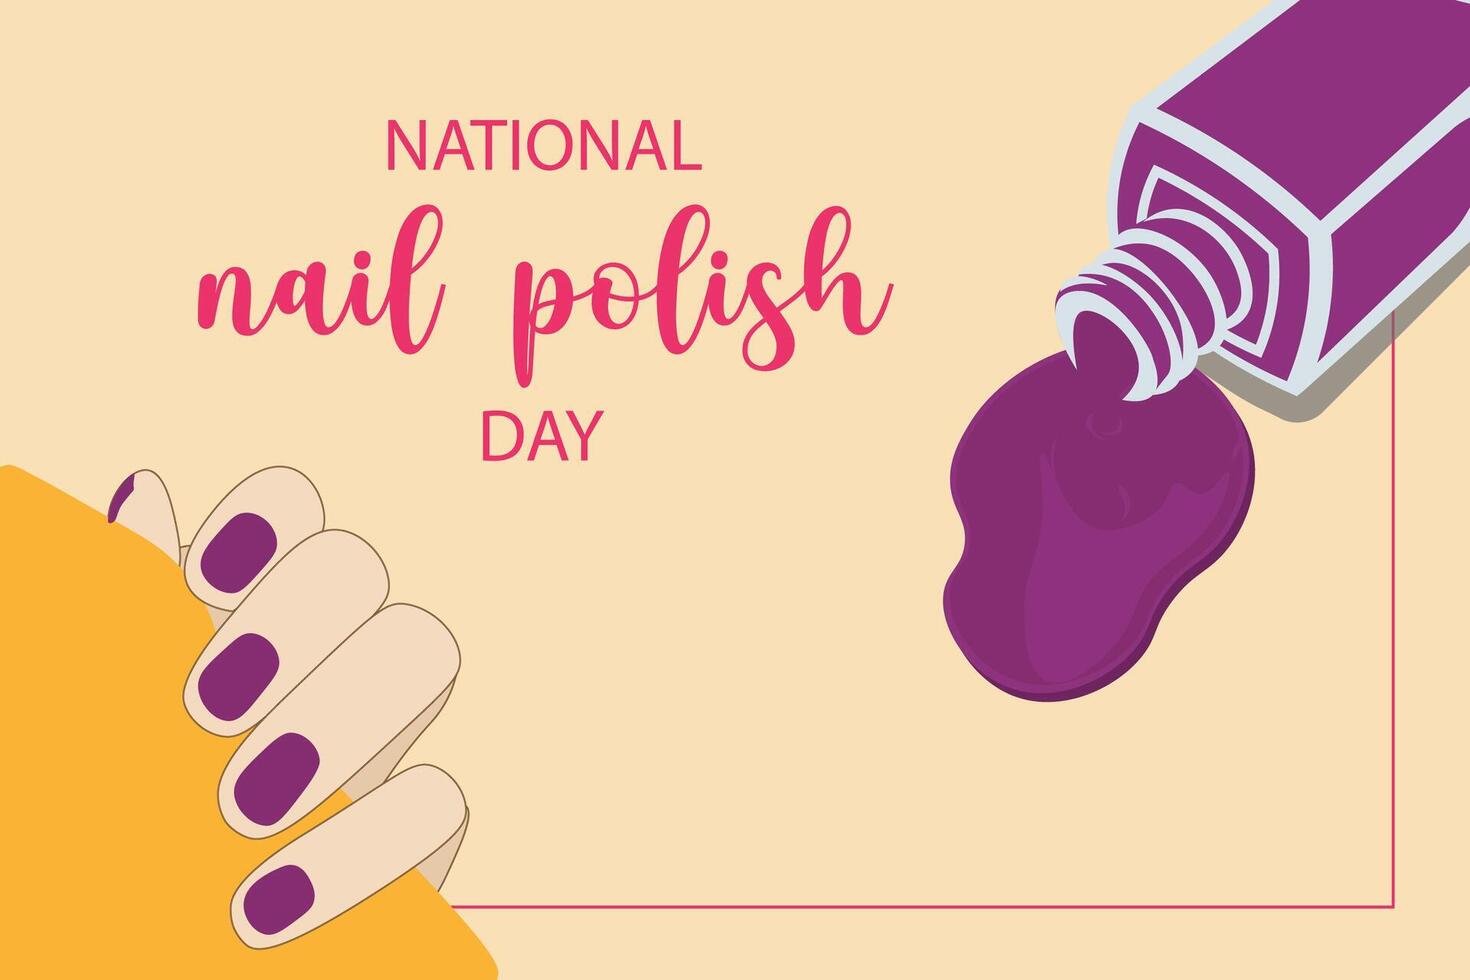 National Nail Polish Day. Concept with woman's hands with polished nails and spilled nail polish illustration for background, banner, card, or poster. vector